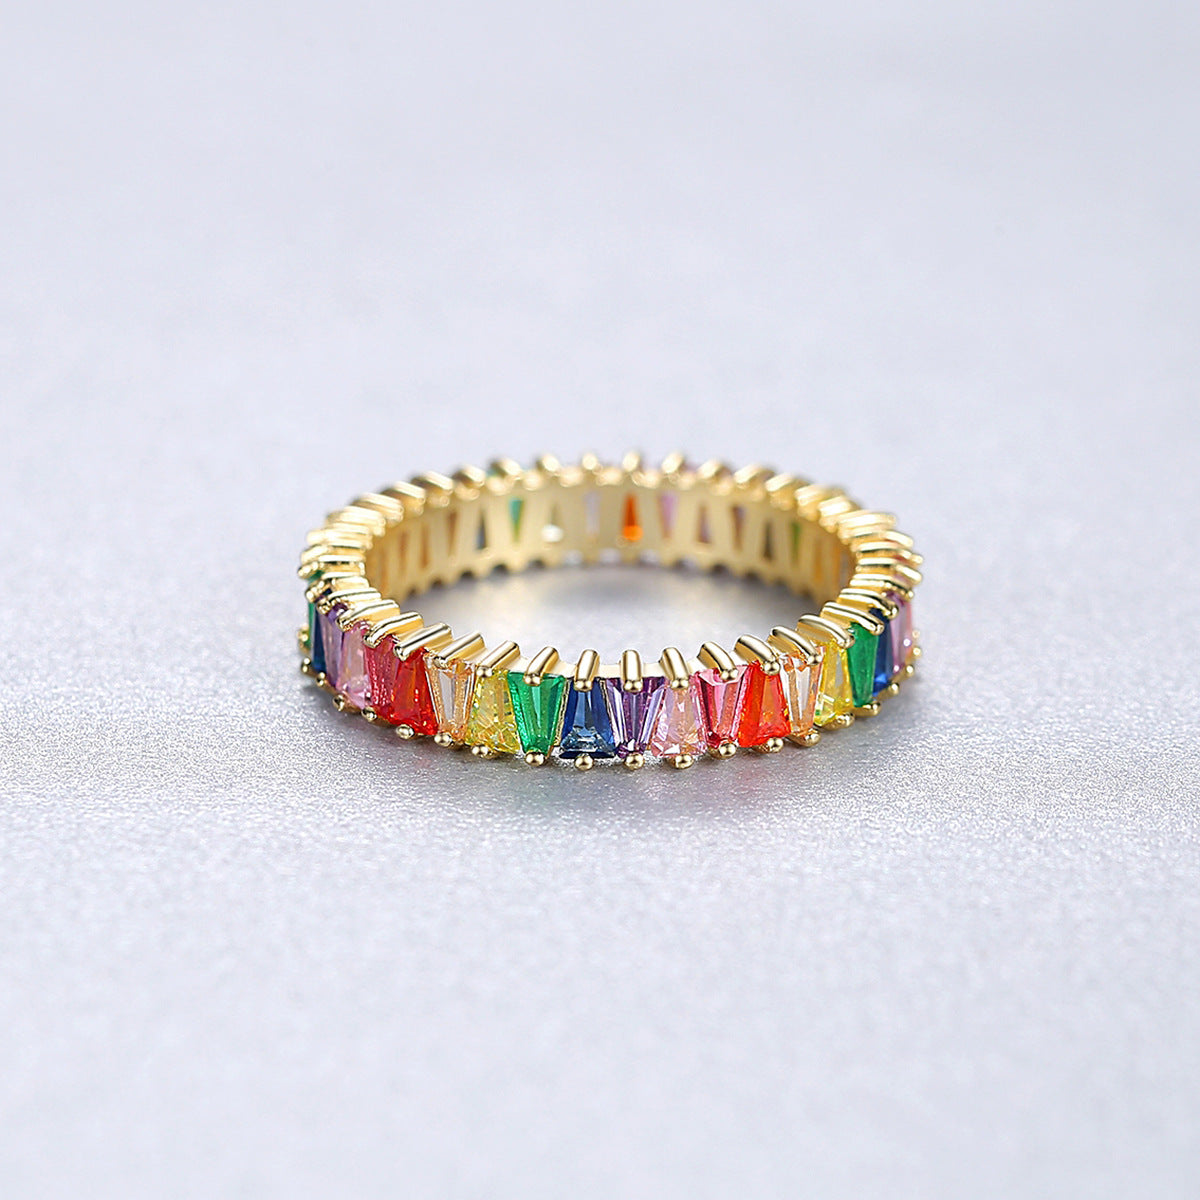 Gemstonely-Chic 925 Silver Rainbow Zirconia Women's Ring - Distinctive Vintage Style for a Standout Accessory